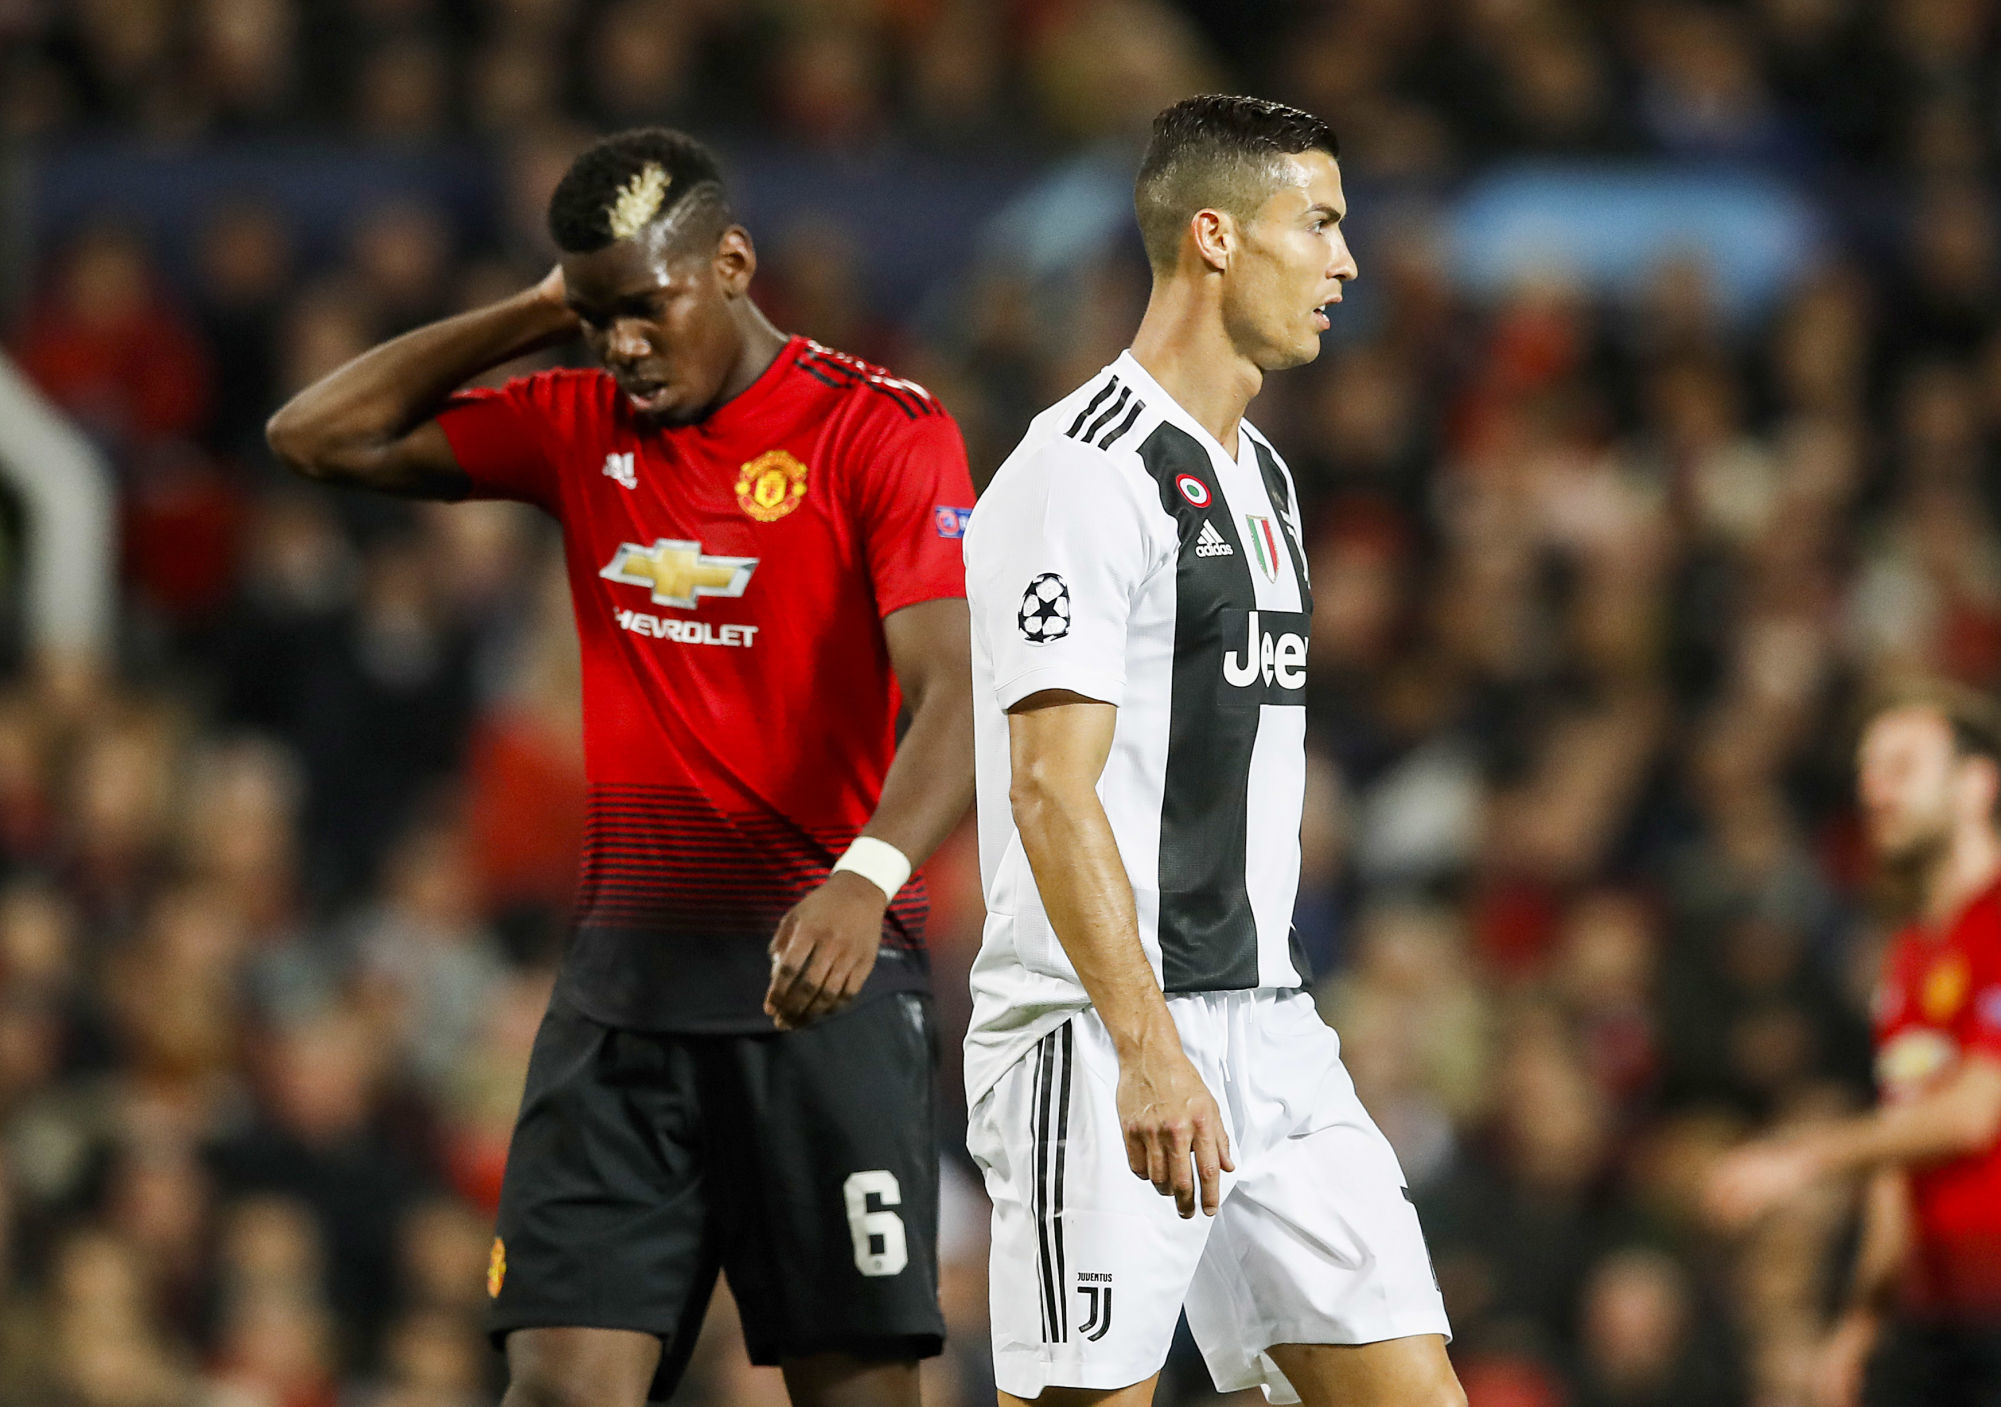 Manchester United's Paul Pogba (left) and Juventus' Cristiano Ronaldo during the UEFA Champions League match between Manchester United and Juventus Fc, at Old Trafford, Manchester, on October 23, 2018. Photo : PA Images / Icon Sport